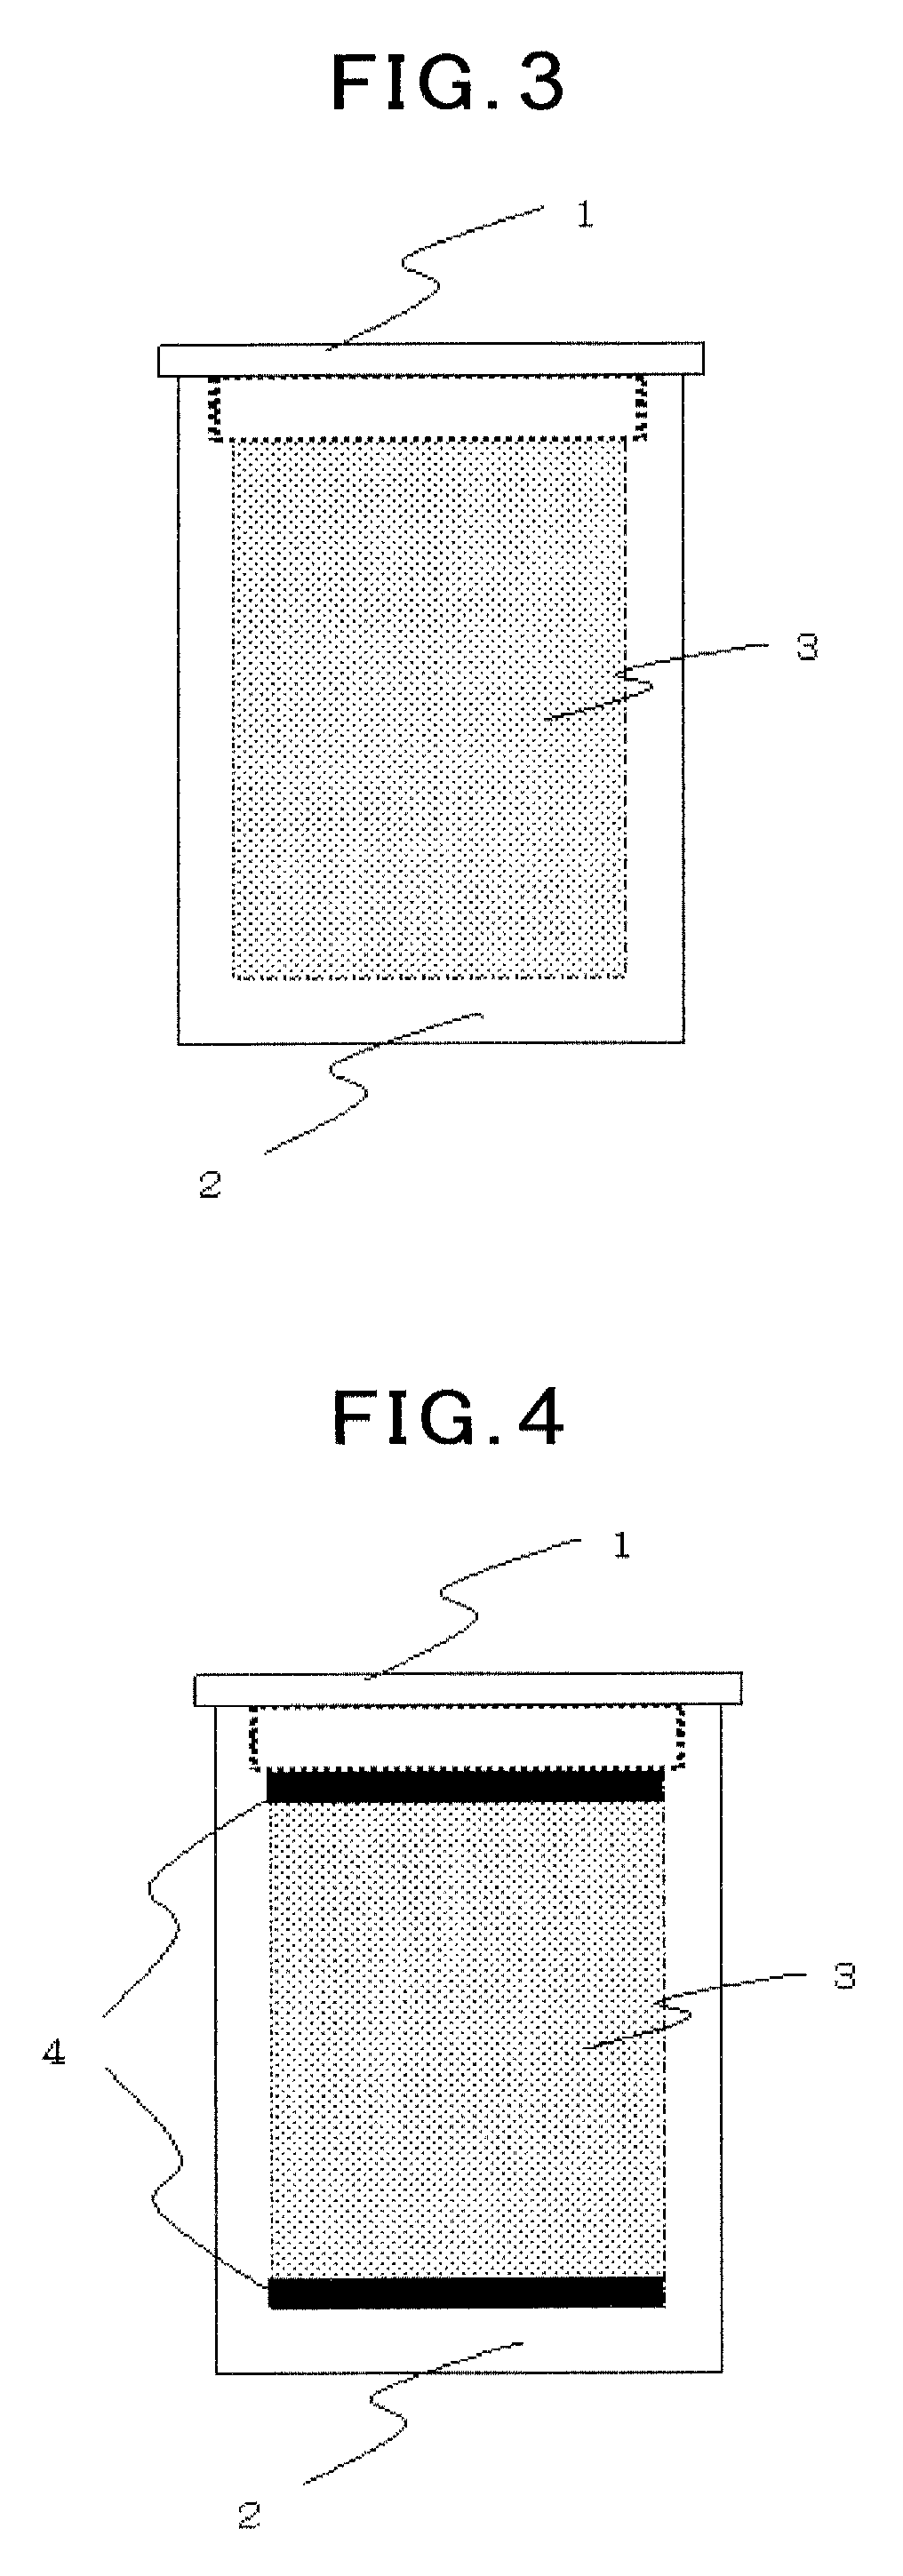 Carbon material and method for producing same